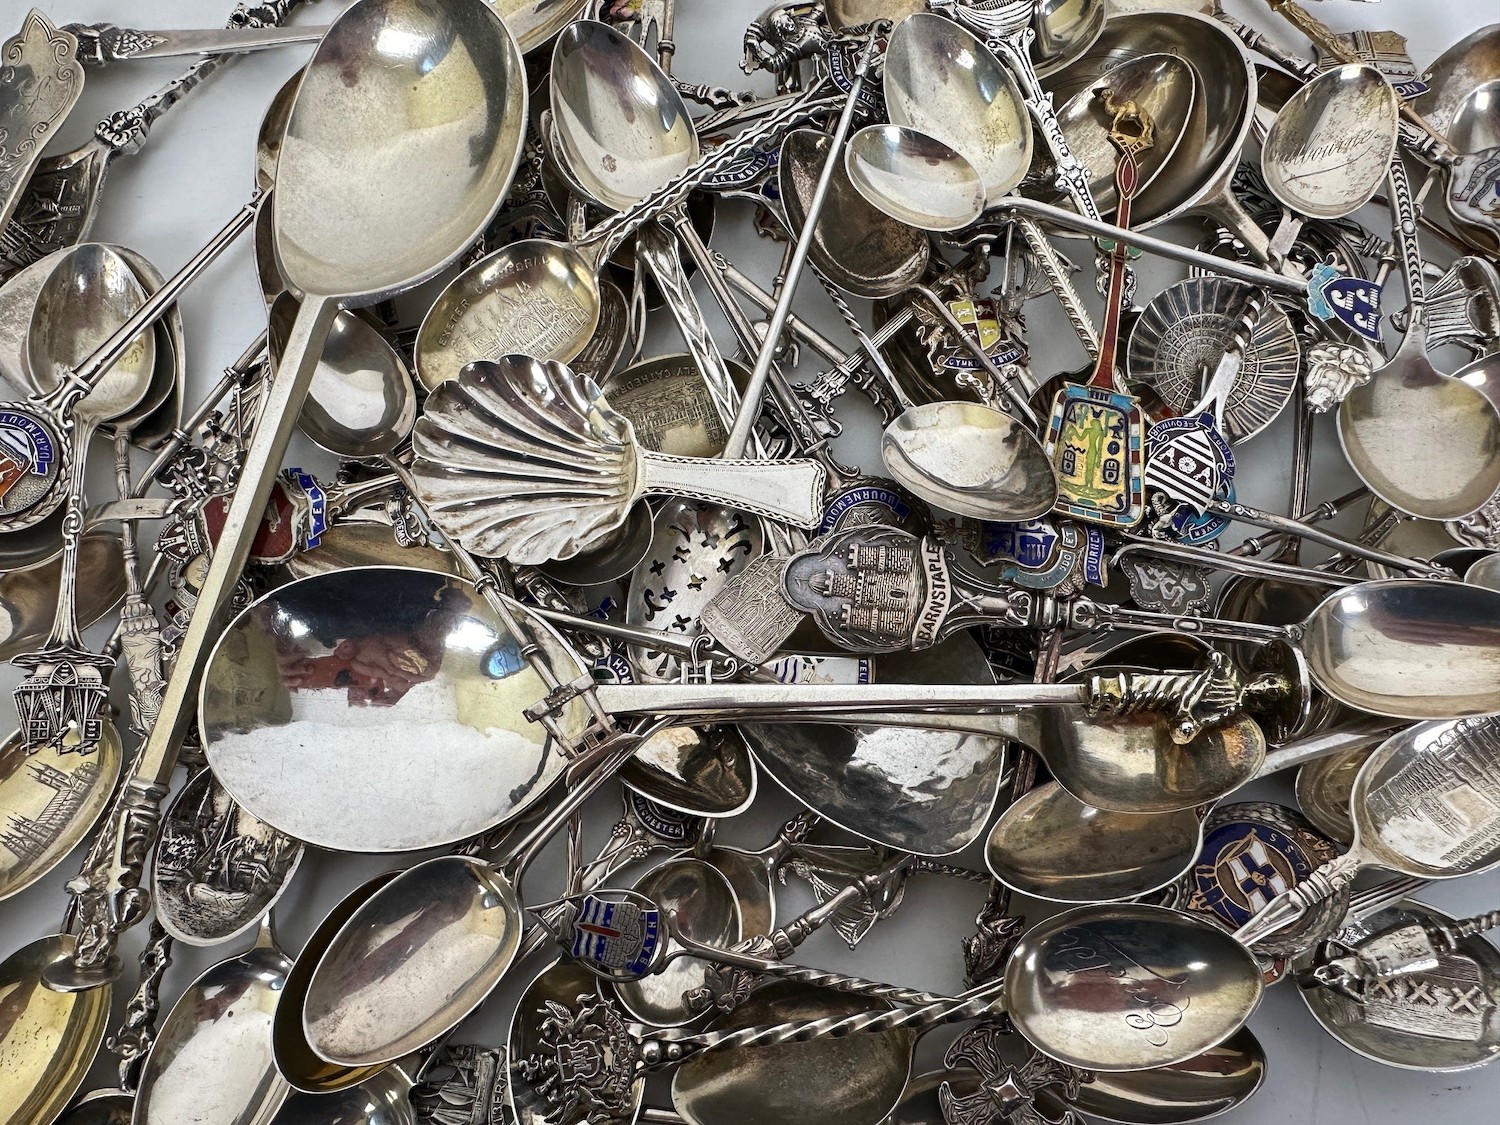 A collection of antique and vintage silver spoons